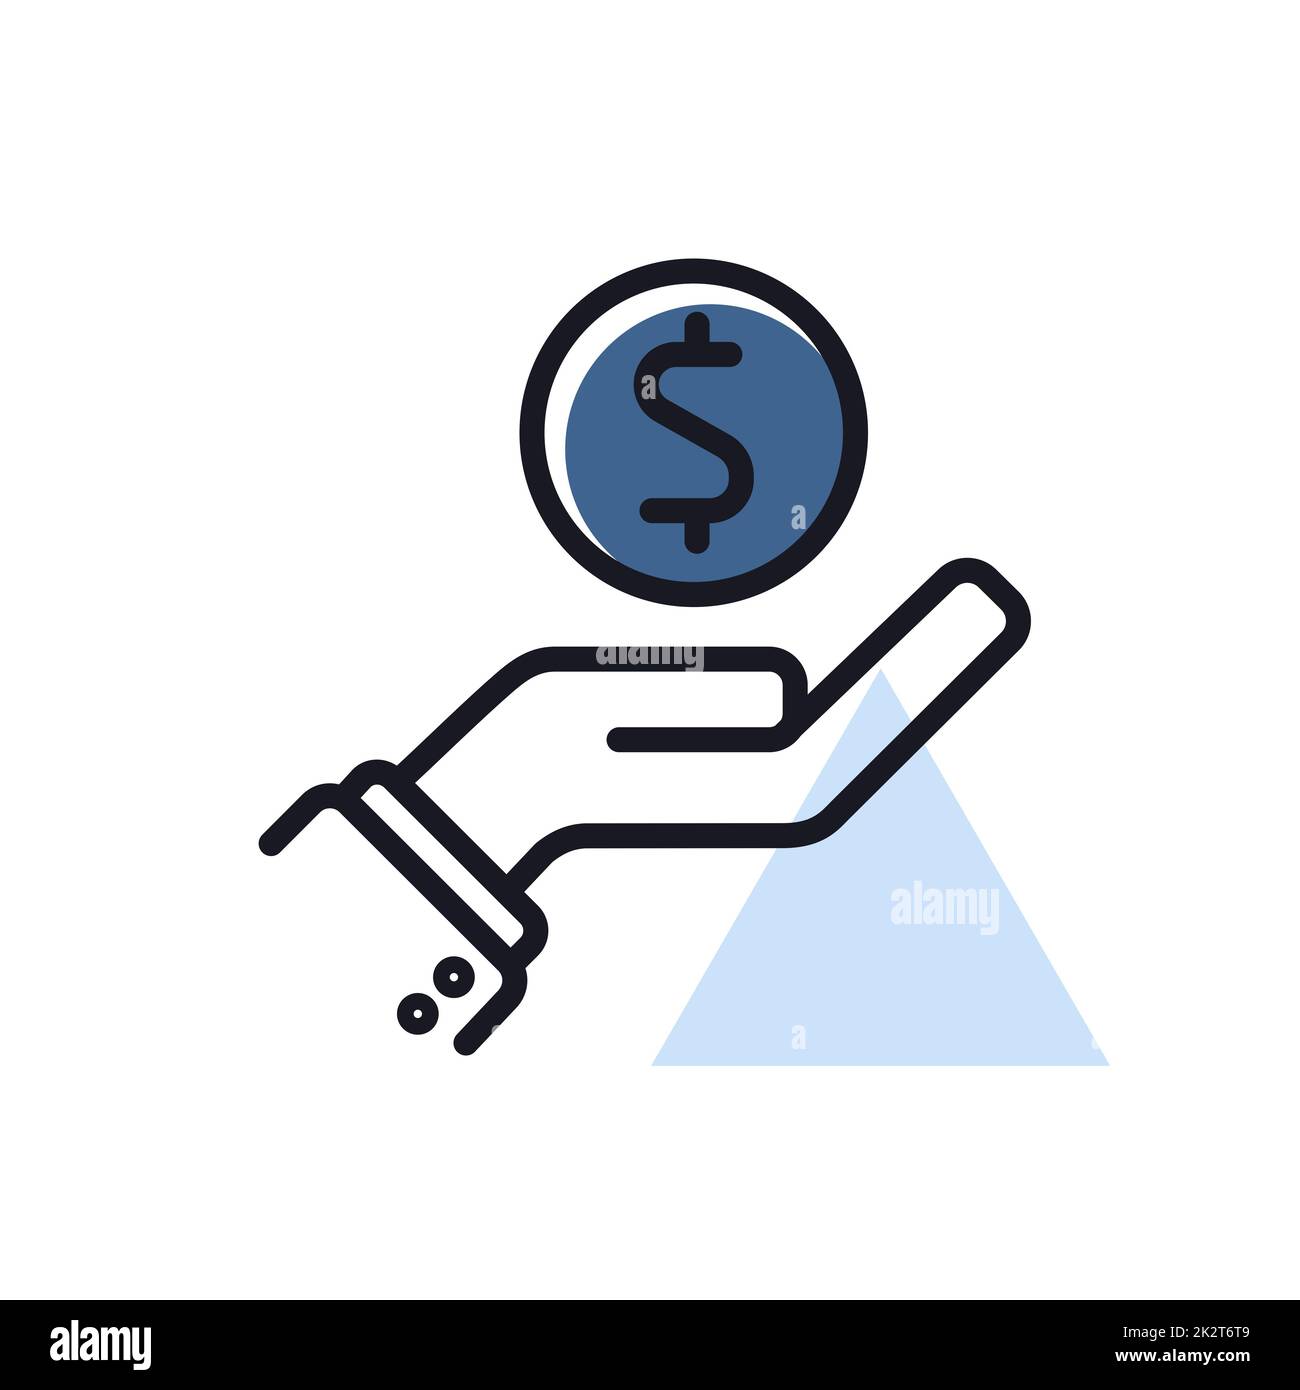 Pictograph of money in hand icon vector Stock Photo